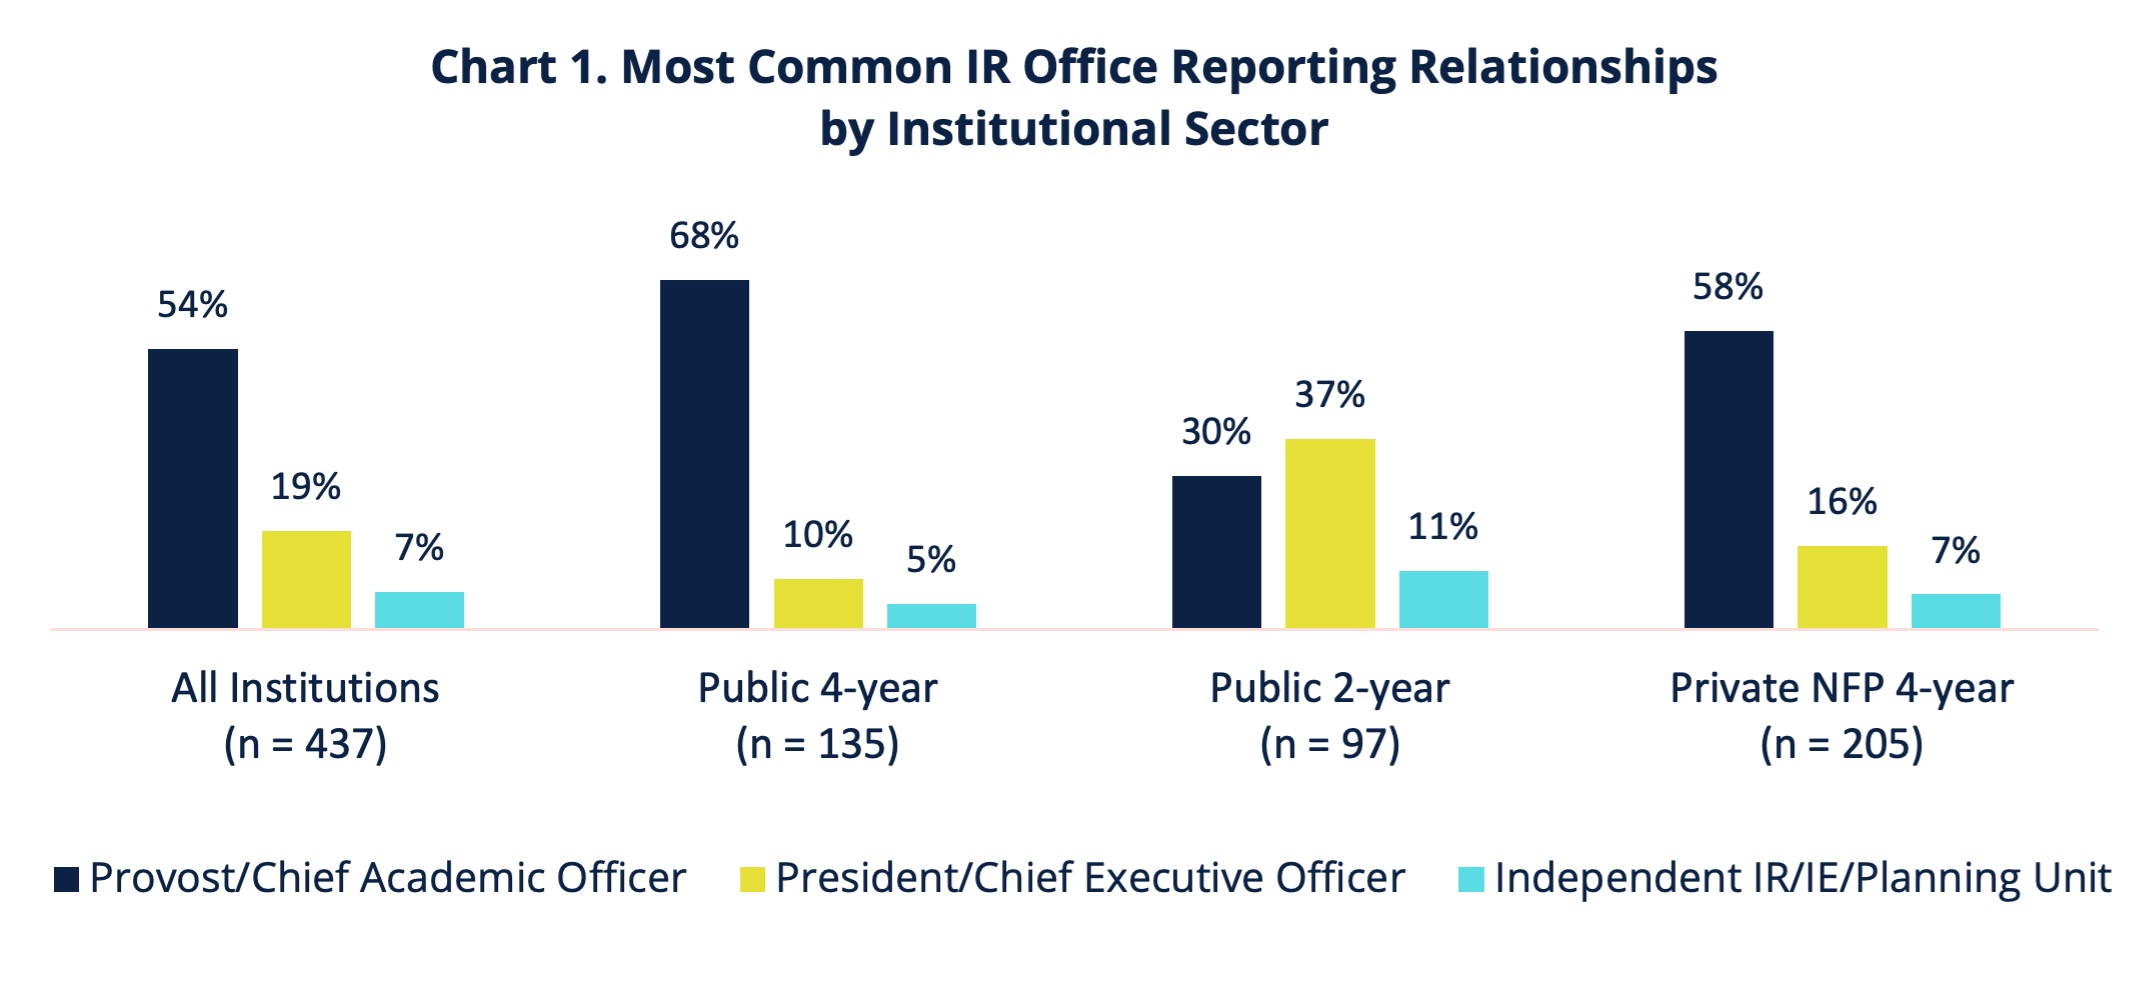 Chart 1. Most Common IR Office Reporting Relationships by Institutional Sector